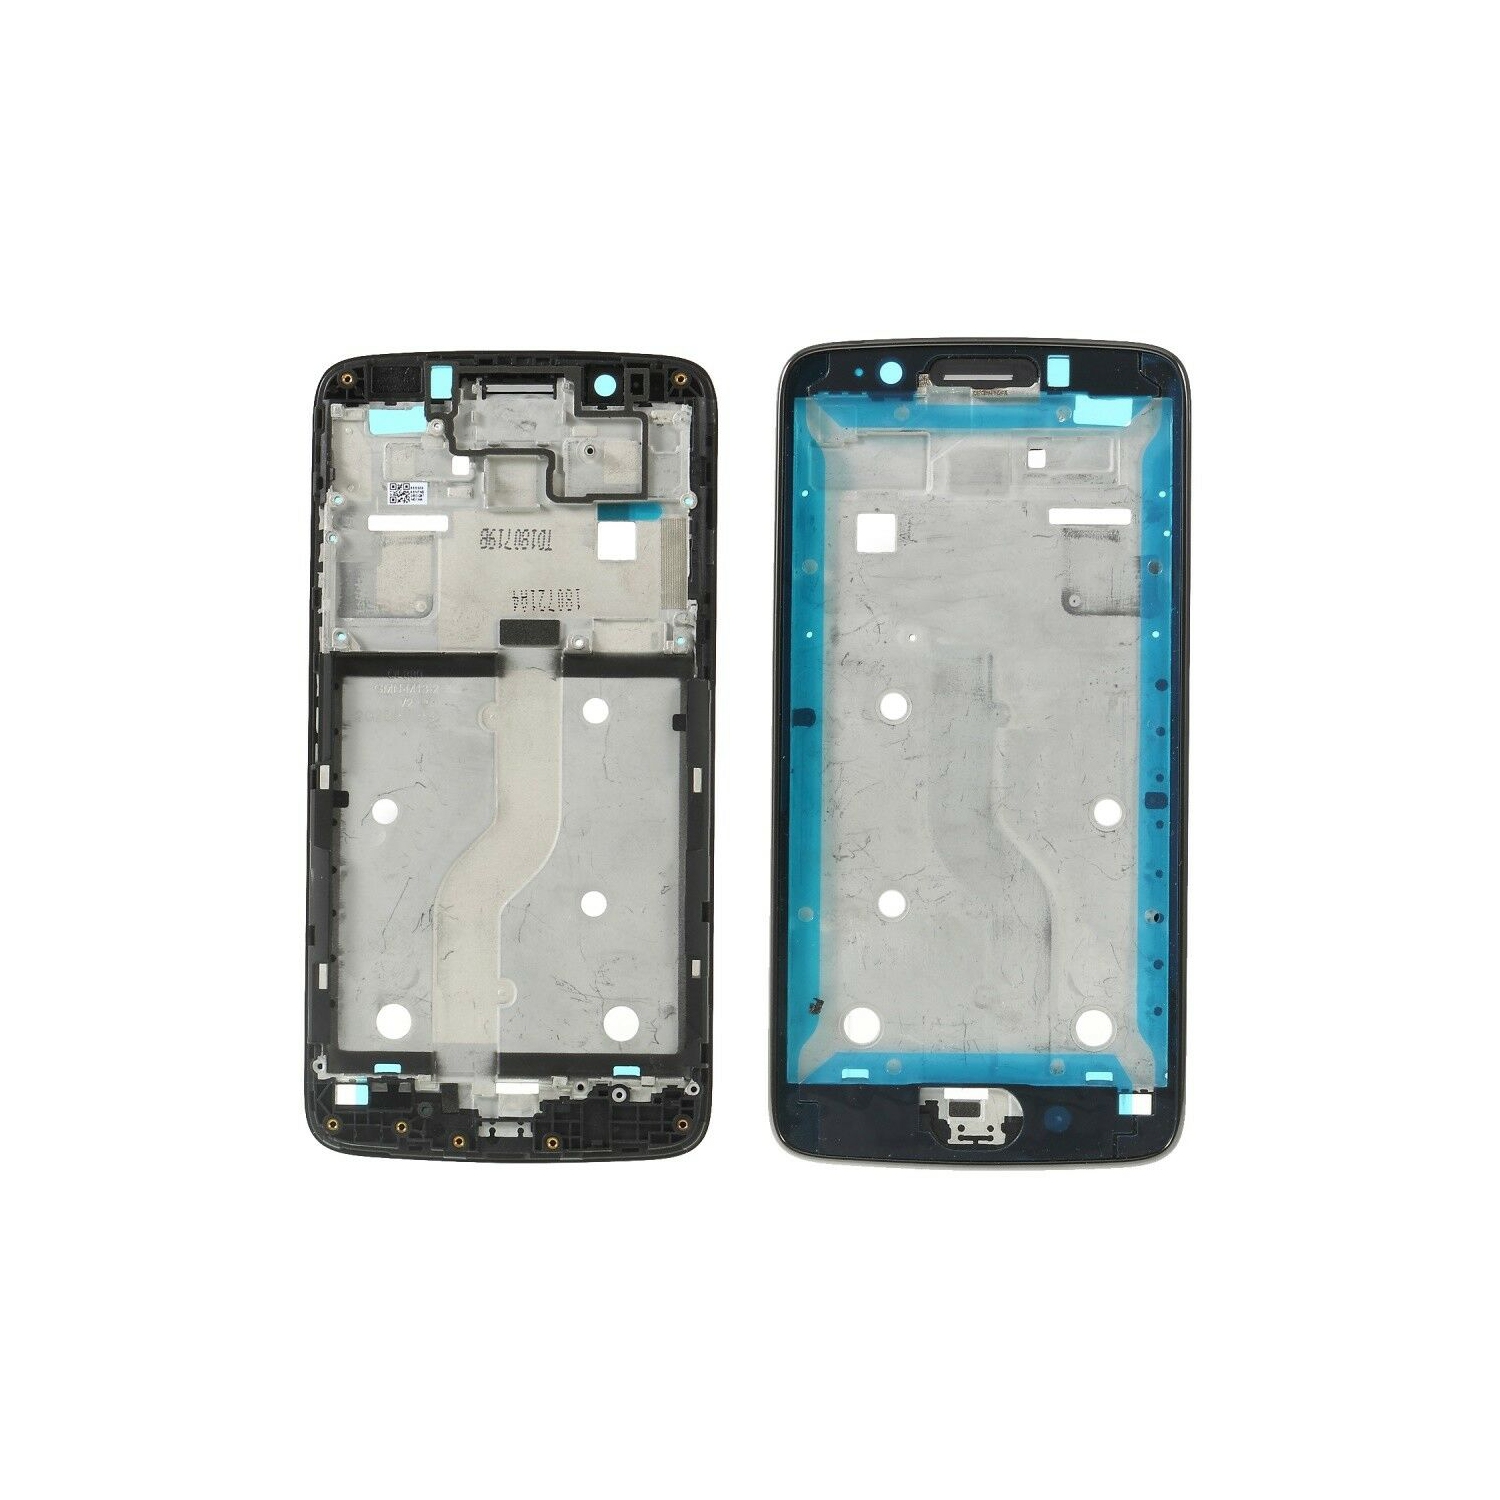 Replacement Middle Frame Bezel Plate Compatible With Motorola Moto G5 XT1670 - Grey